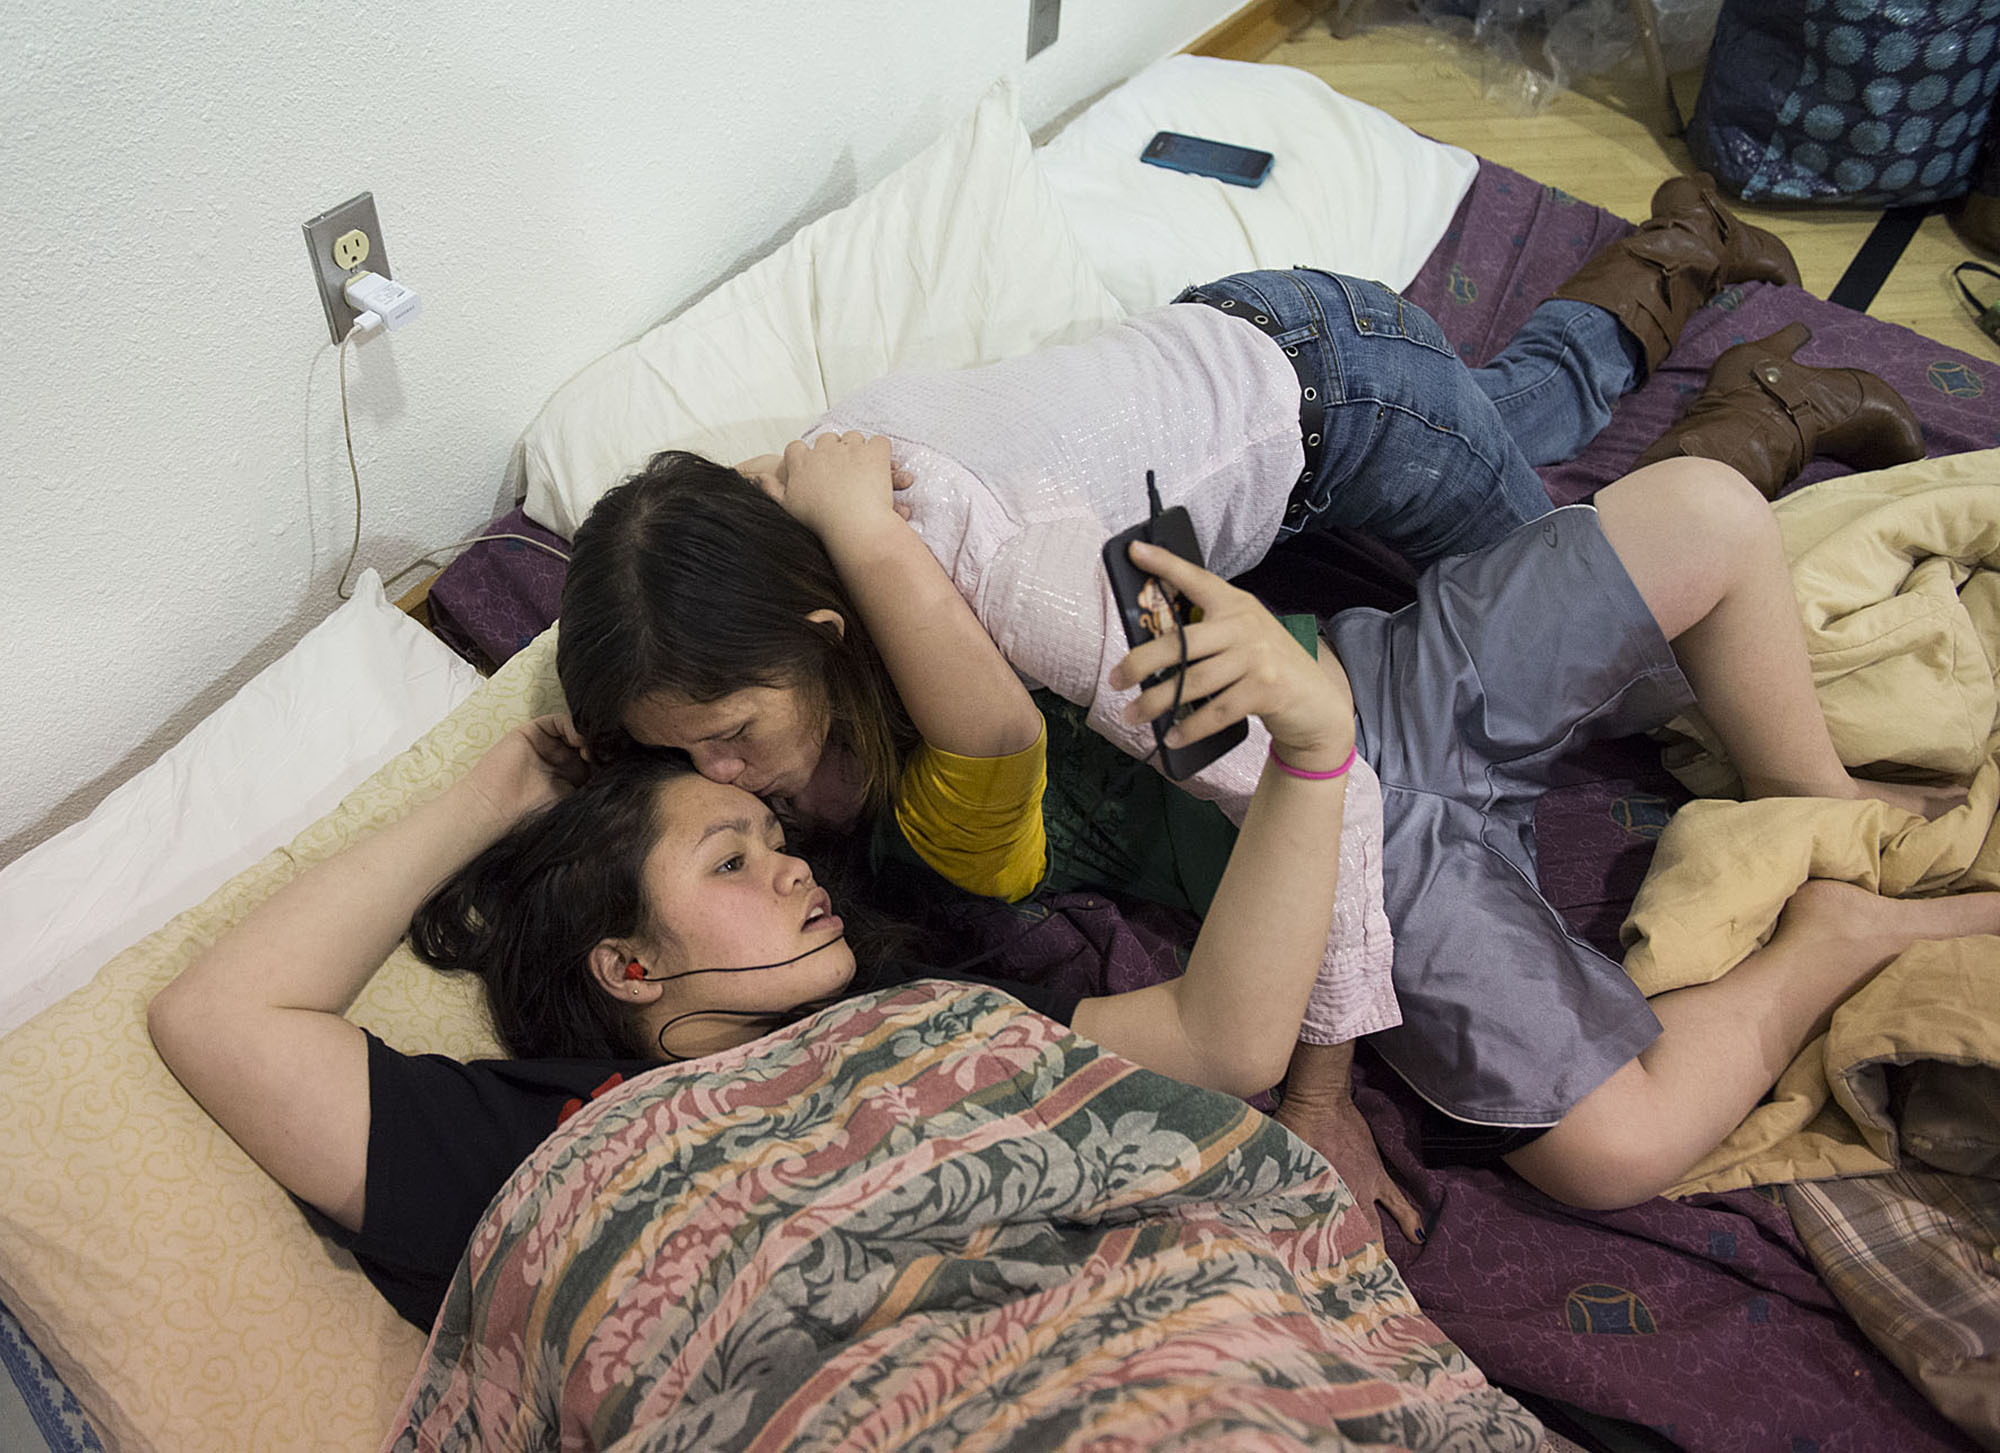 Shyanne Tanguileg, 16, left, gets a kiss from her mom, Donna, right, as they settle in for the night with her brother, Johnny Pinaula, 7, in gray shorts, Wednesday night, Dec. 2, 2015 at the Winter Hospitality Overflow at St. Andrew Lutheran Church. (Amanda Cowan/The Columbian)